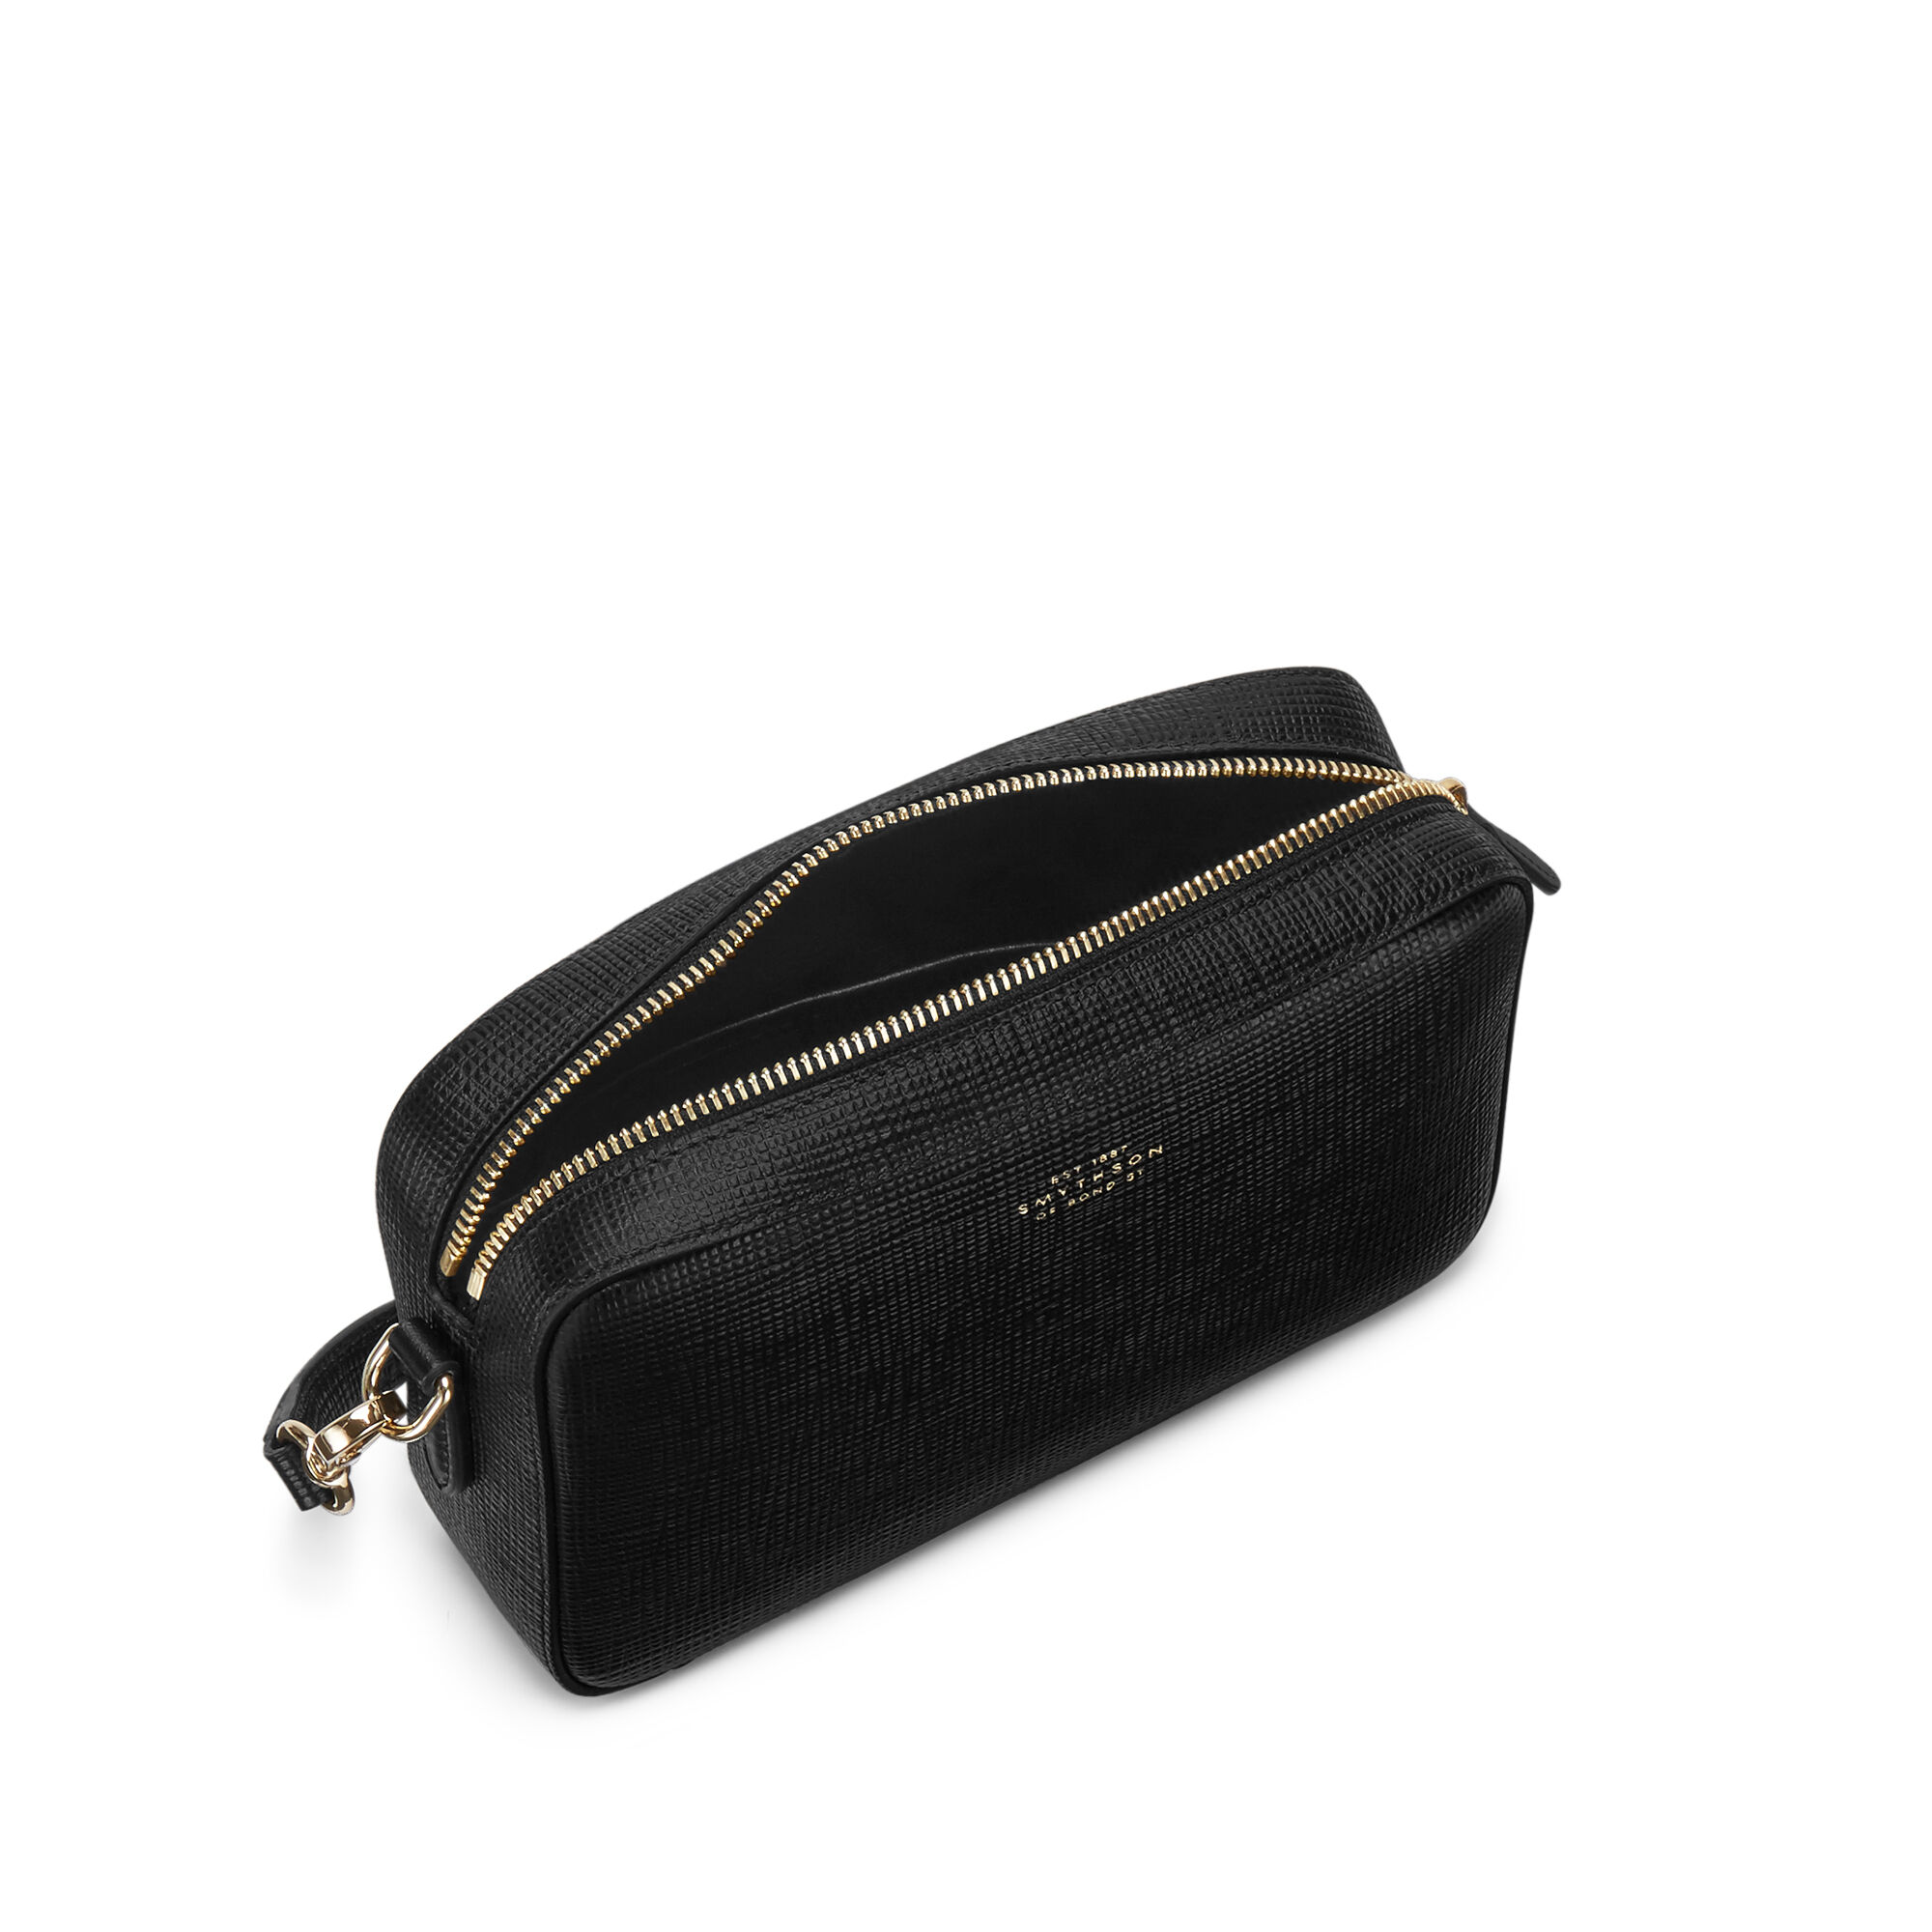 Smythson Women's Panama Mini Camera Bag with Leather Strap, Black, One Size  : Amazon.in: Clothing & Accessories